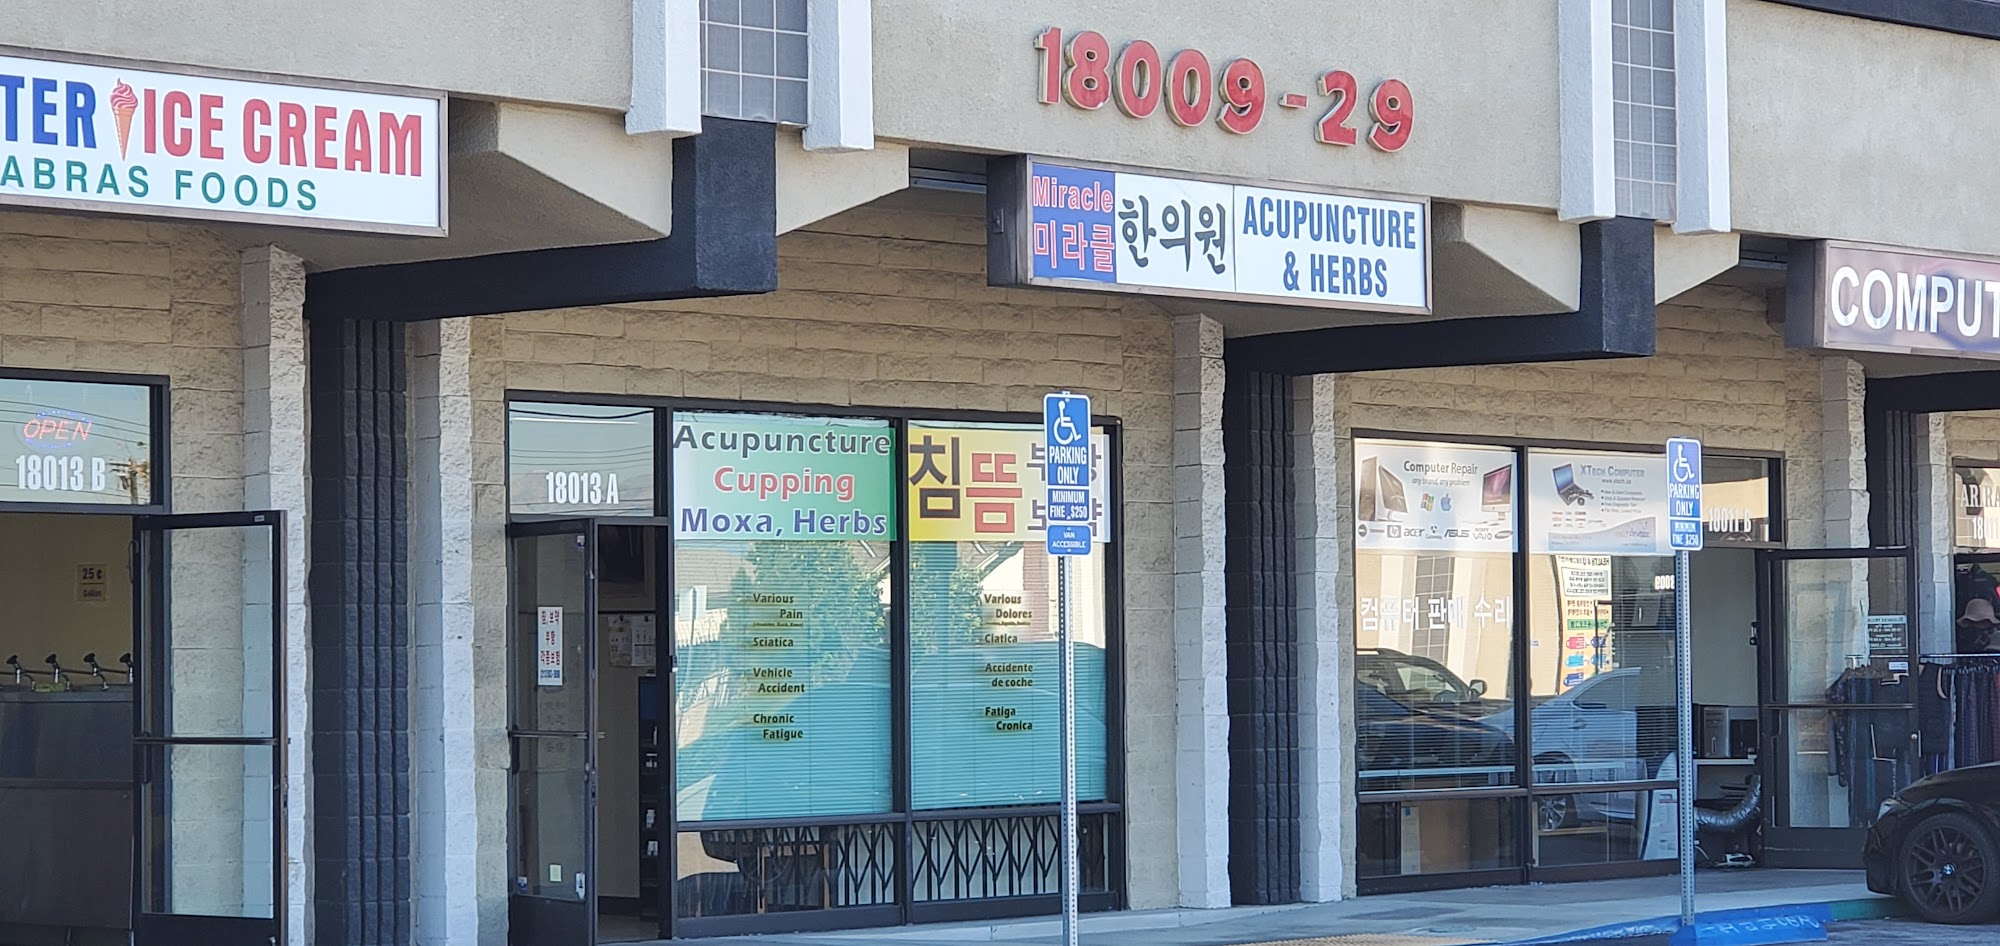 Miracle Acupuncture & Herb